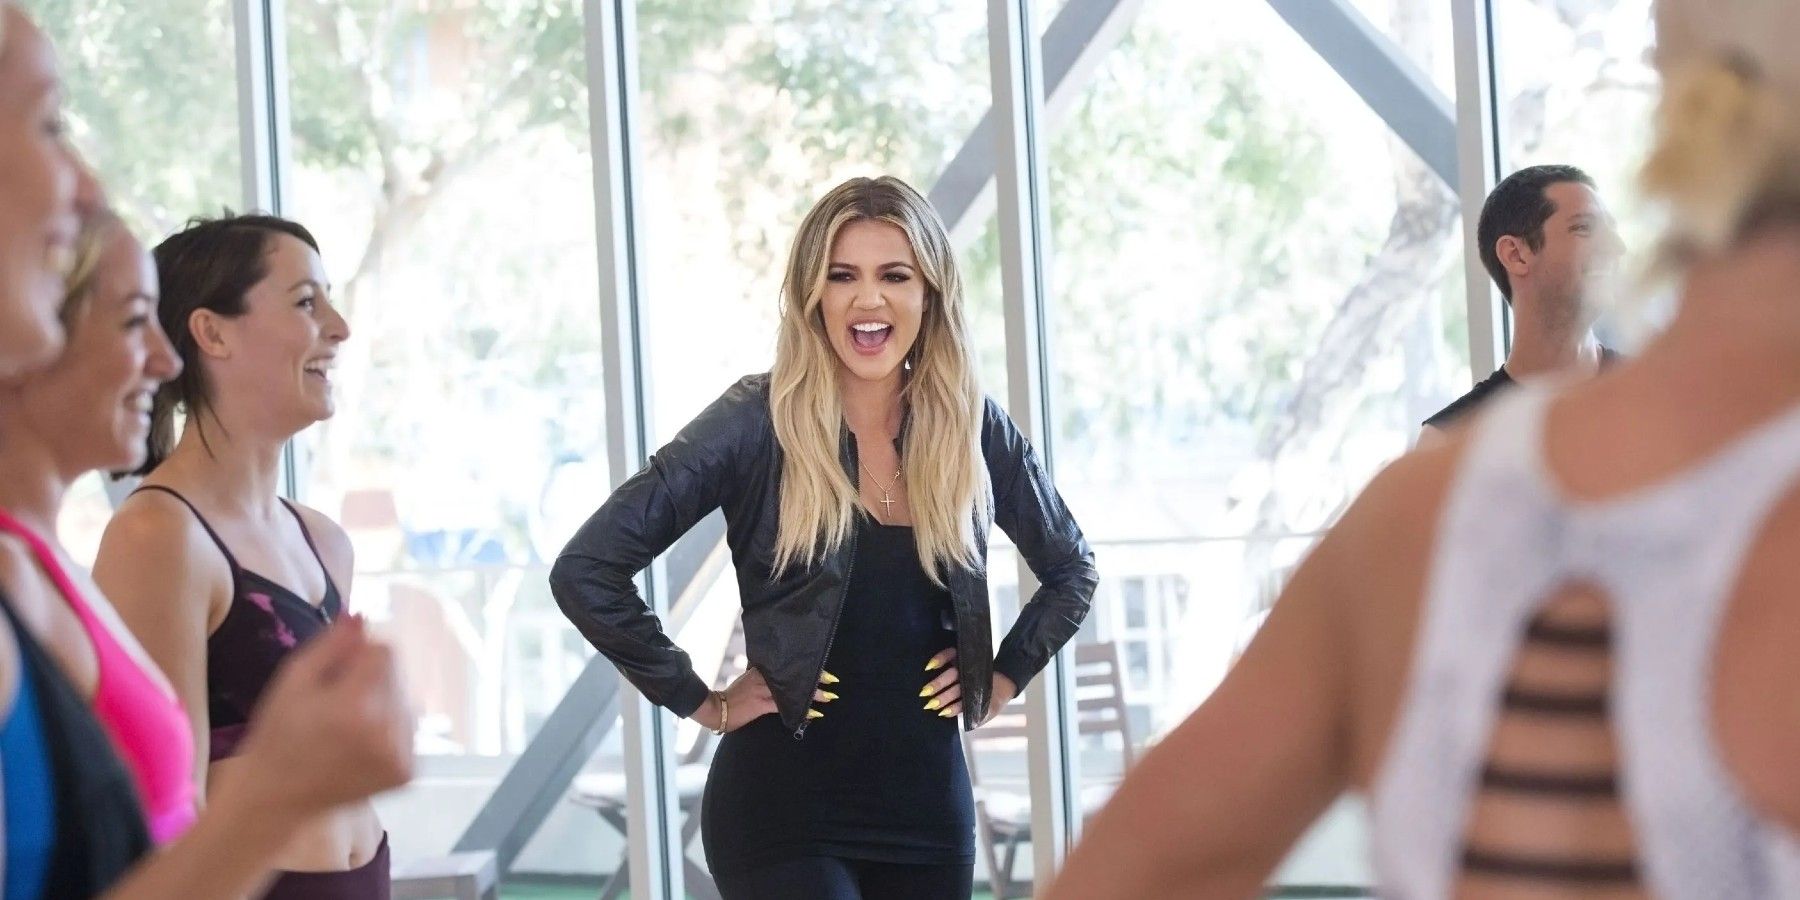 Why Fans Are Calling Khloé Kardashian's Revenge Body Show 'Problematic